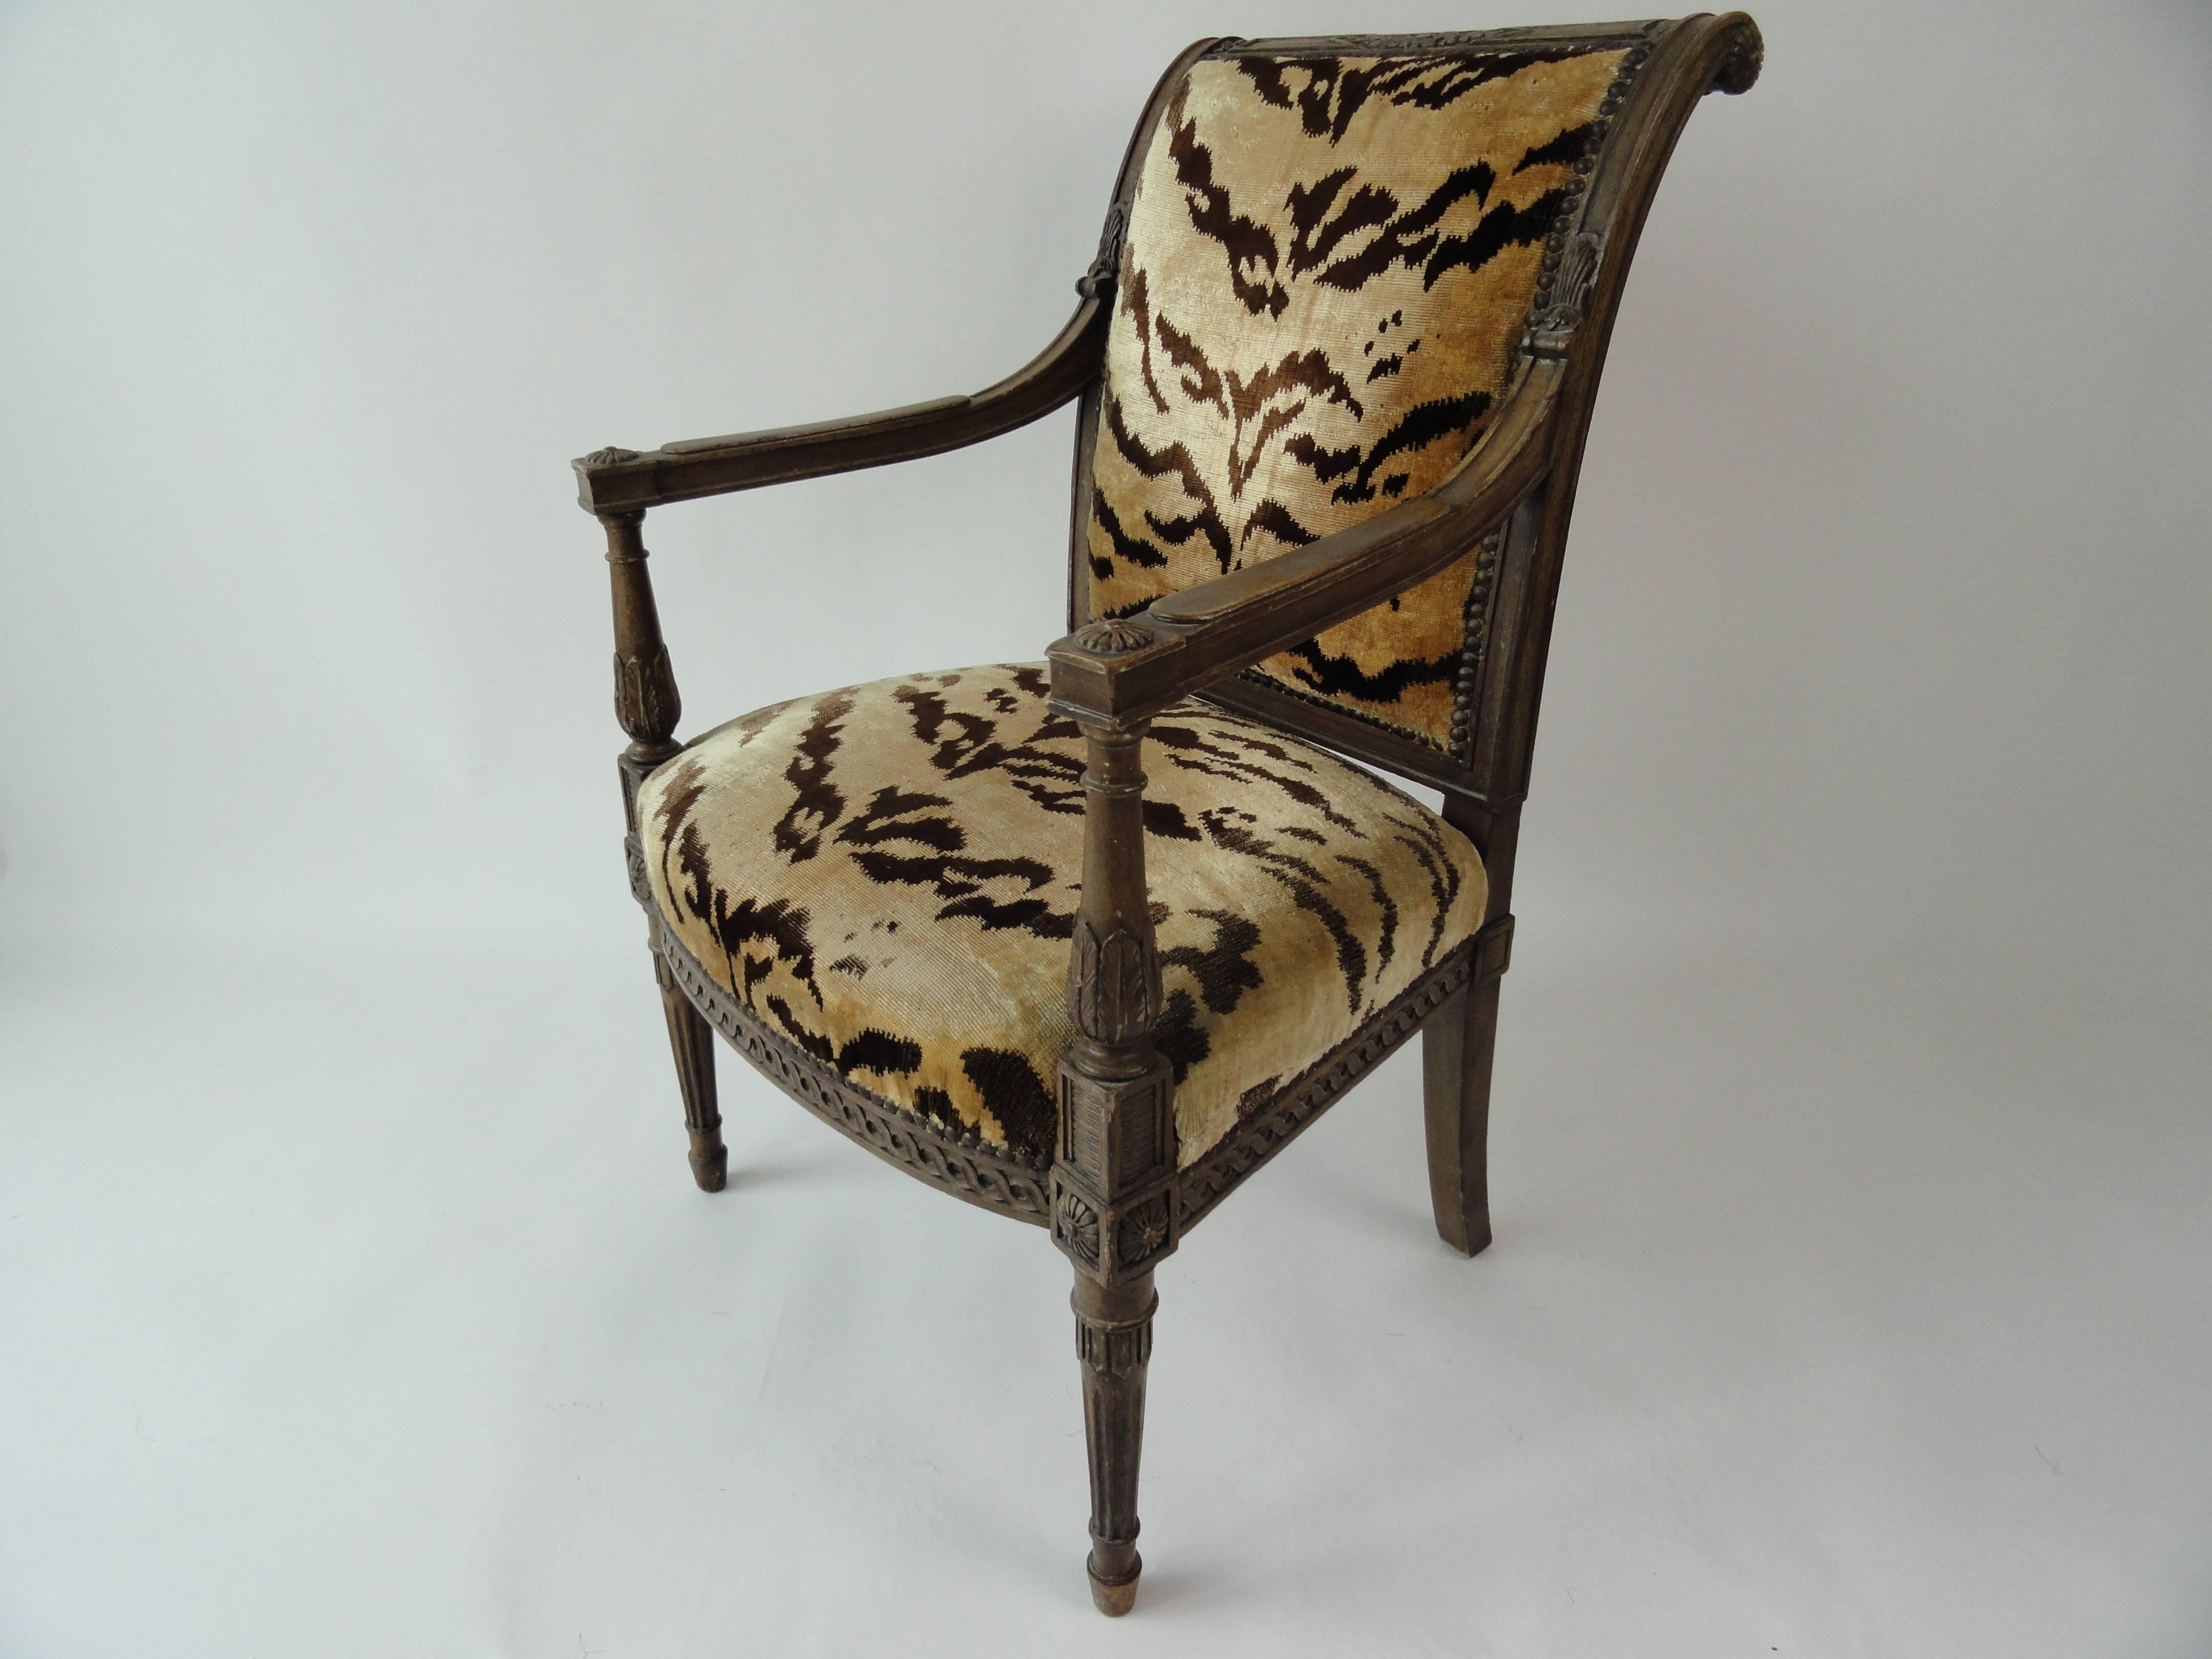 20th century Directoire-style armchair by Yale R. Burge covered in silk tiger velvet. Beechwood.